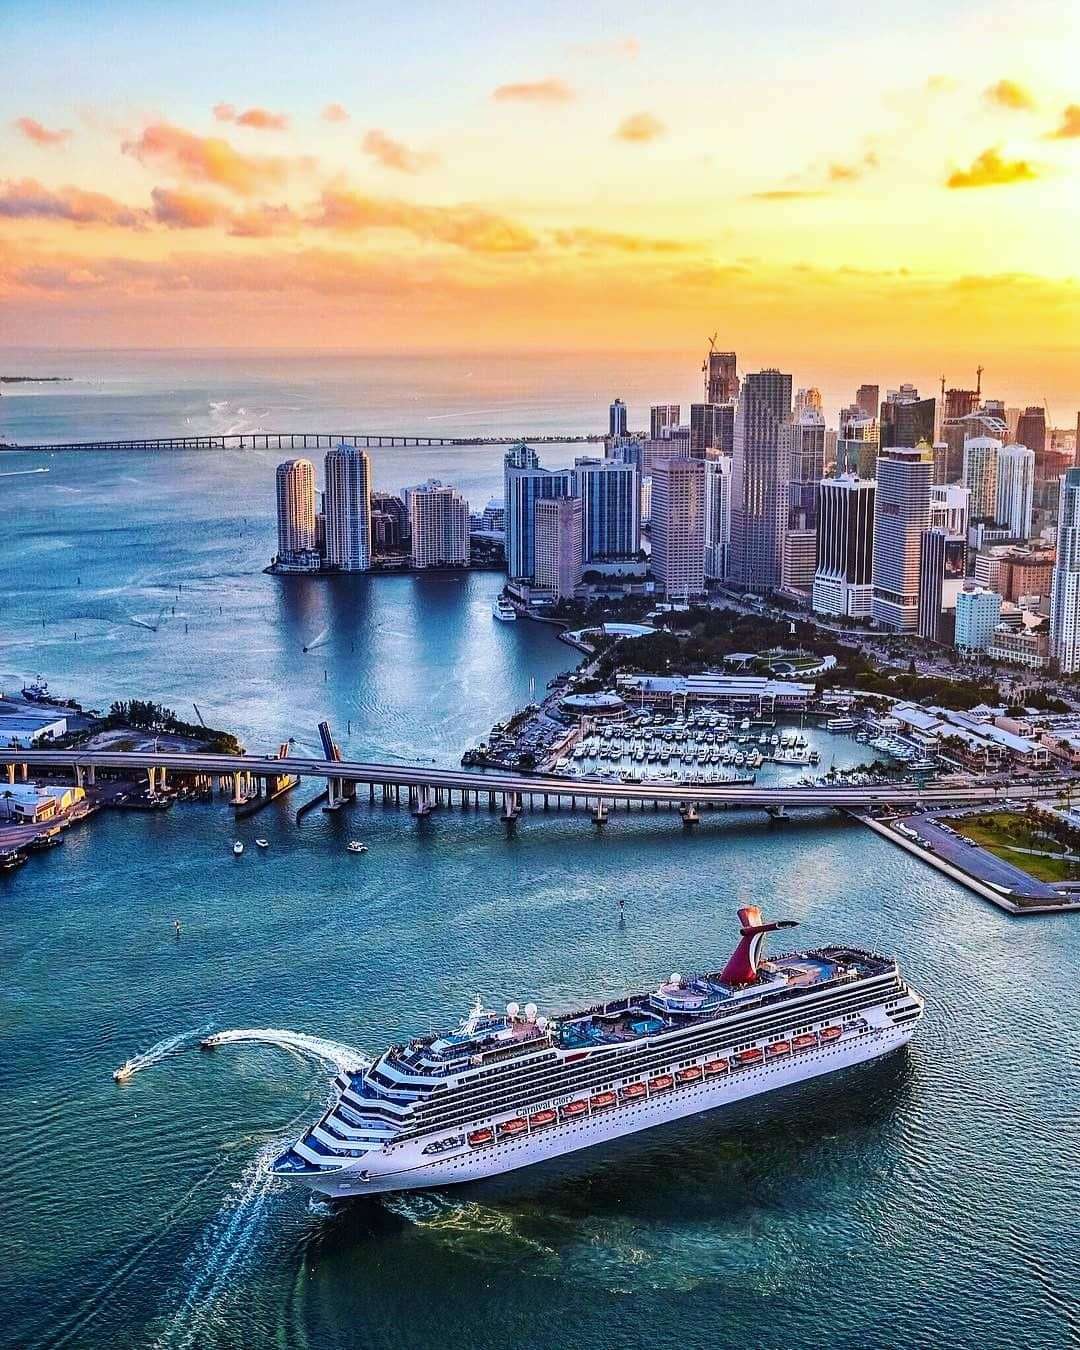 Carnival Glory basking in the Miami sunset ð§¡âï¸? Have you been to Miami ...